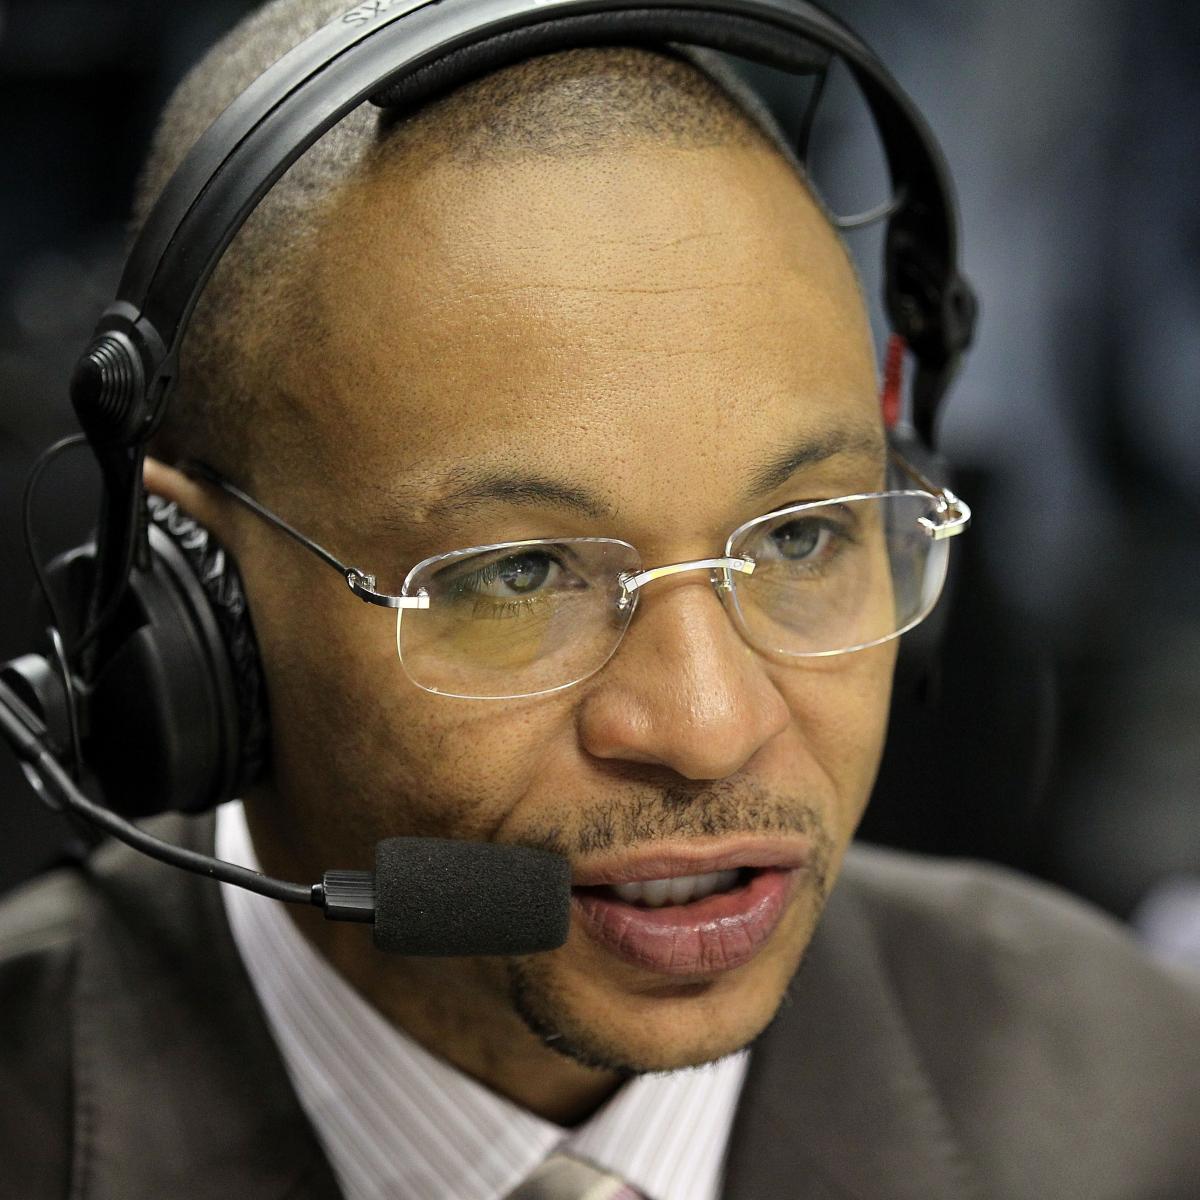 FIFA World Cup: Why Fox's Gus Johnson Could Be a Good Fit, Eventually